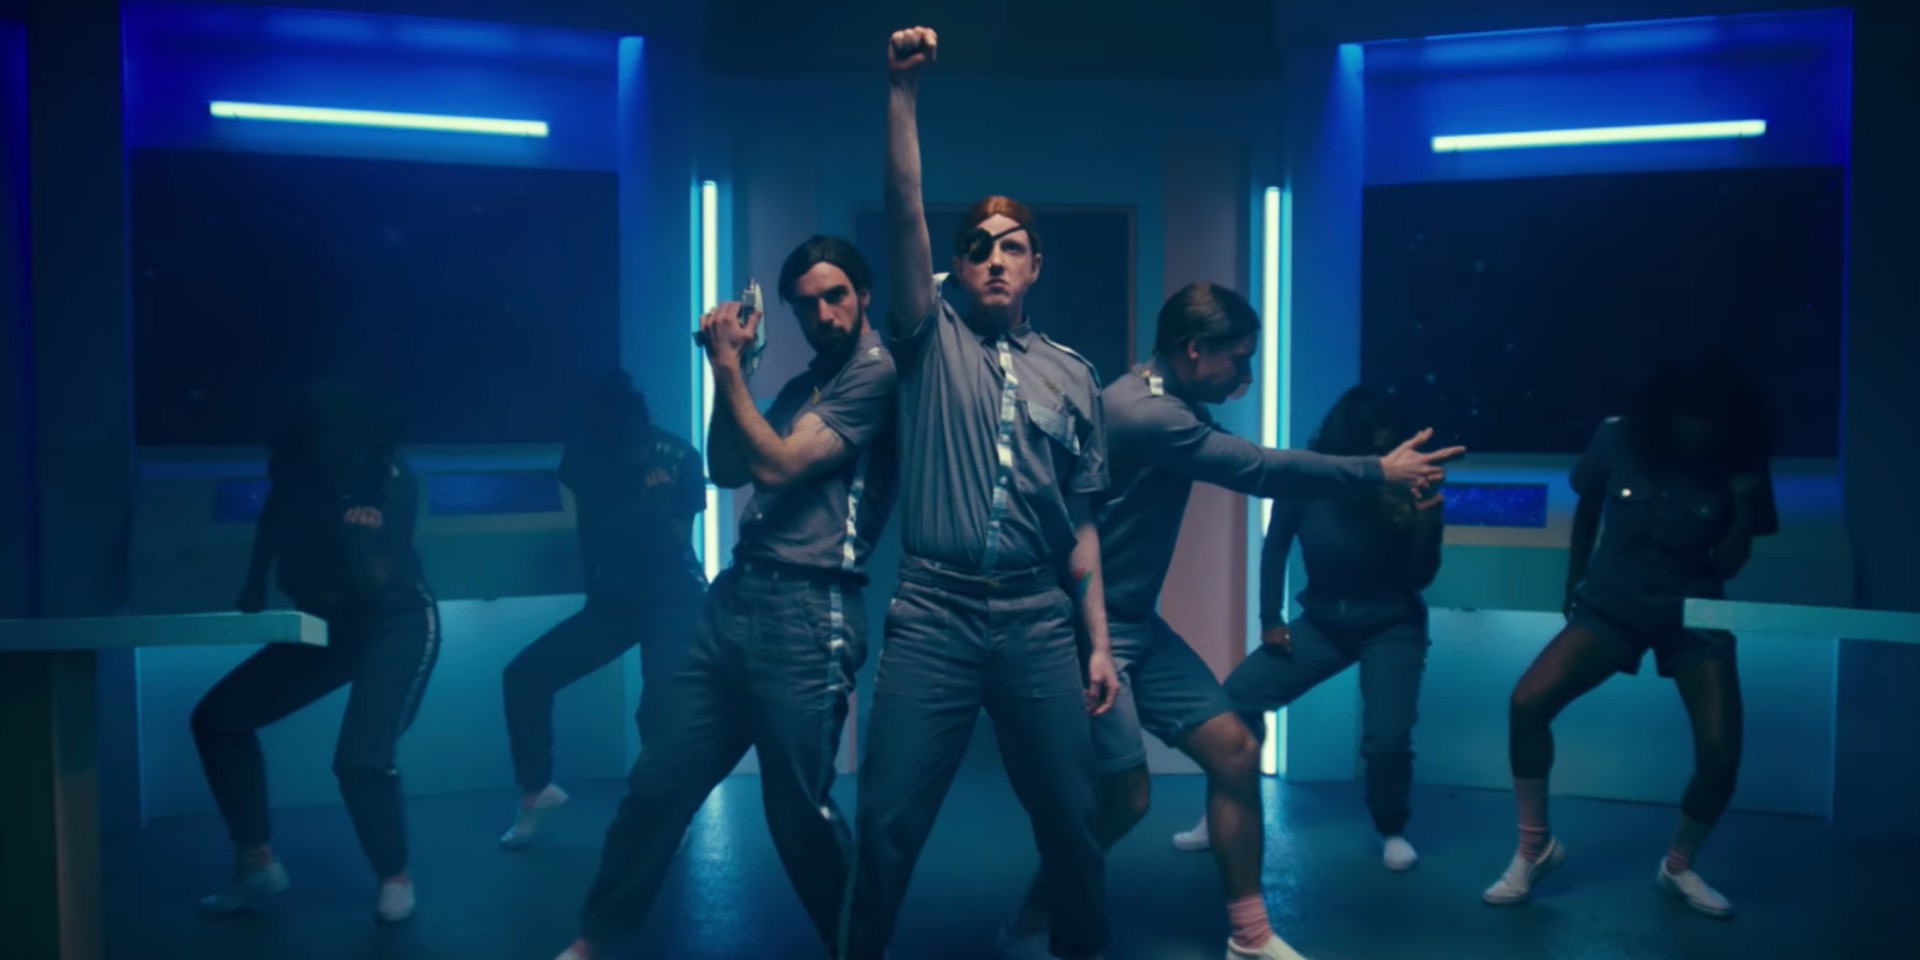 Two Door Cinema Club tries to avert a disaster in space in new music video for 'Satellite' – watch